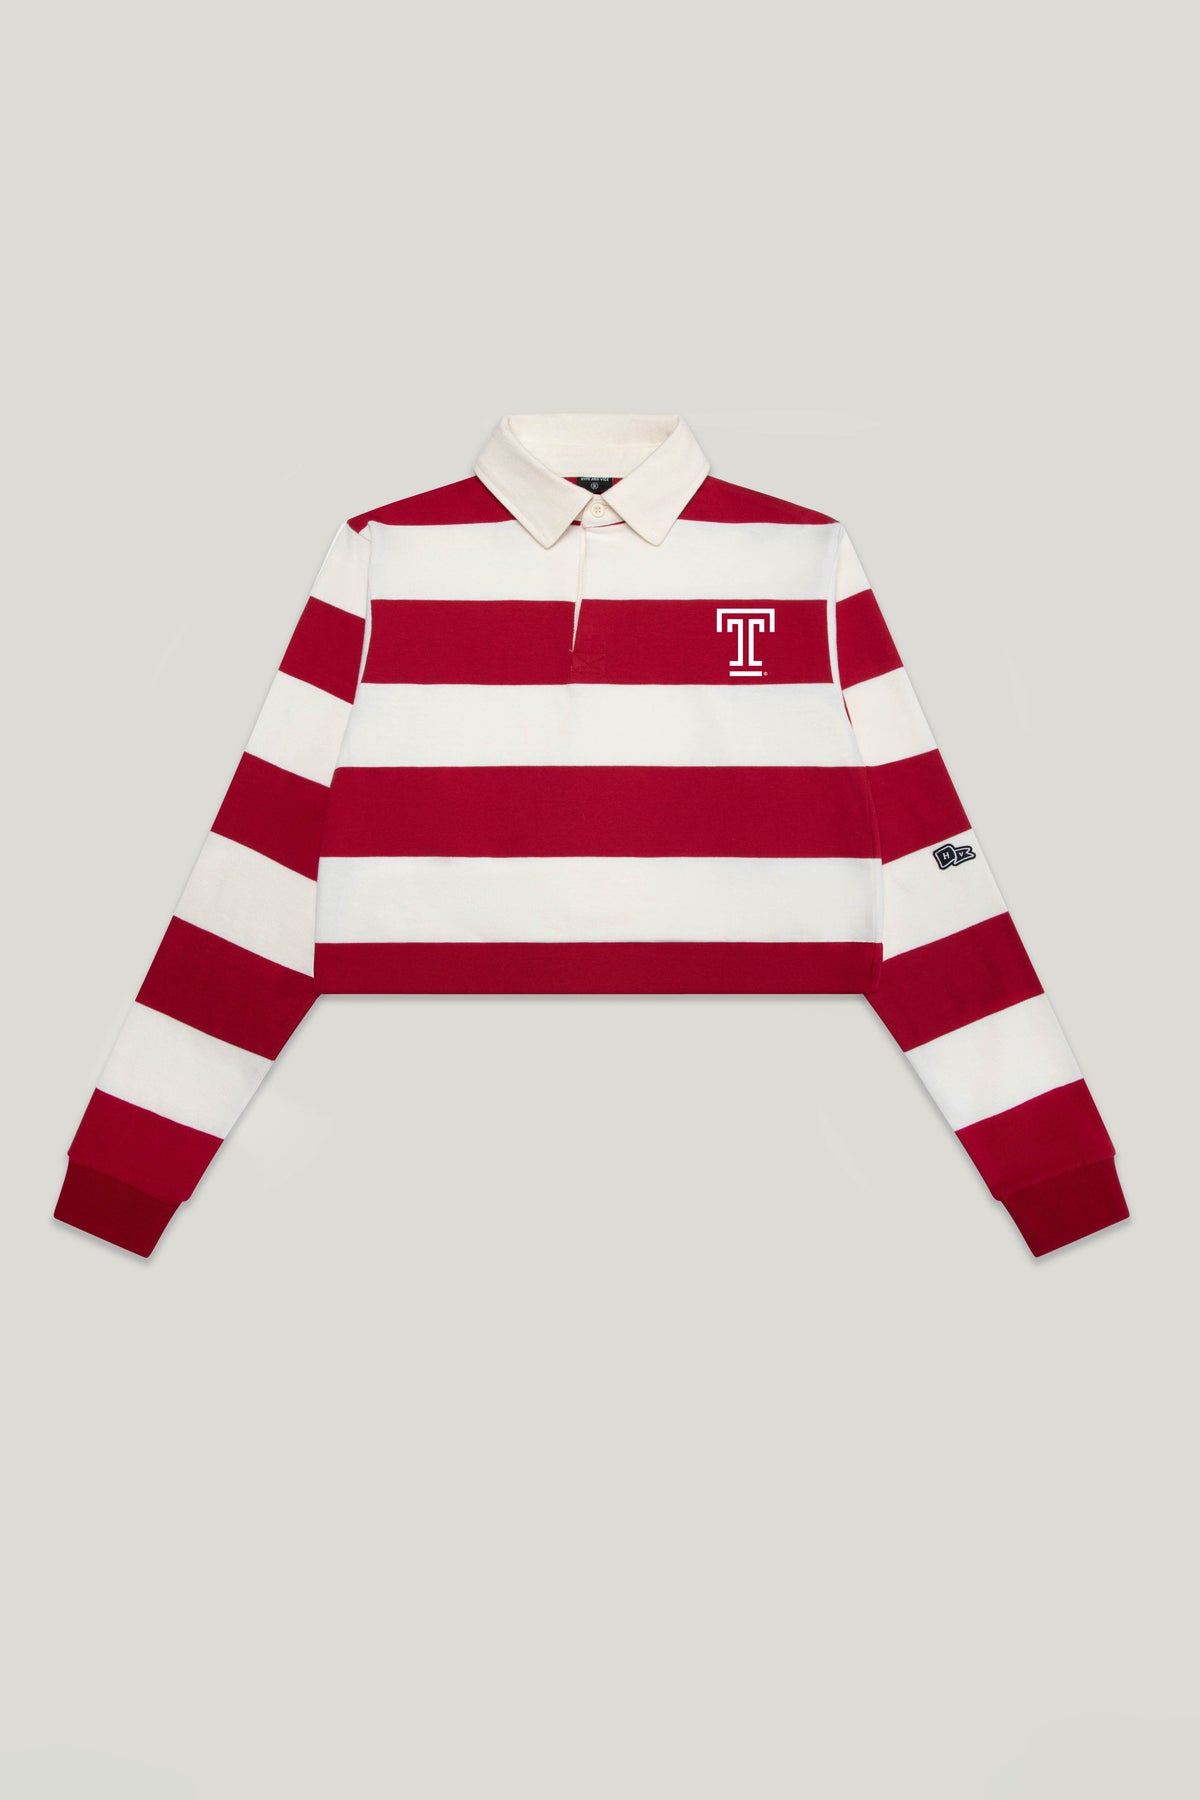 Temple University Rugby Top